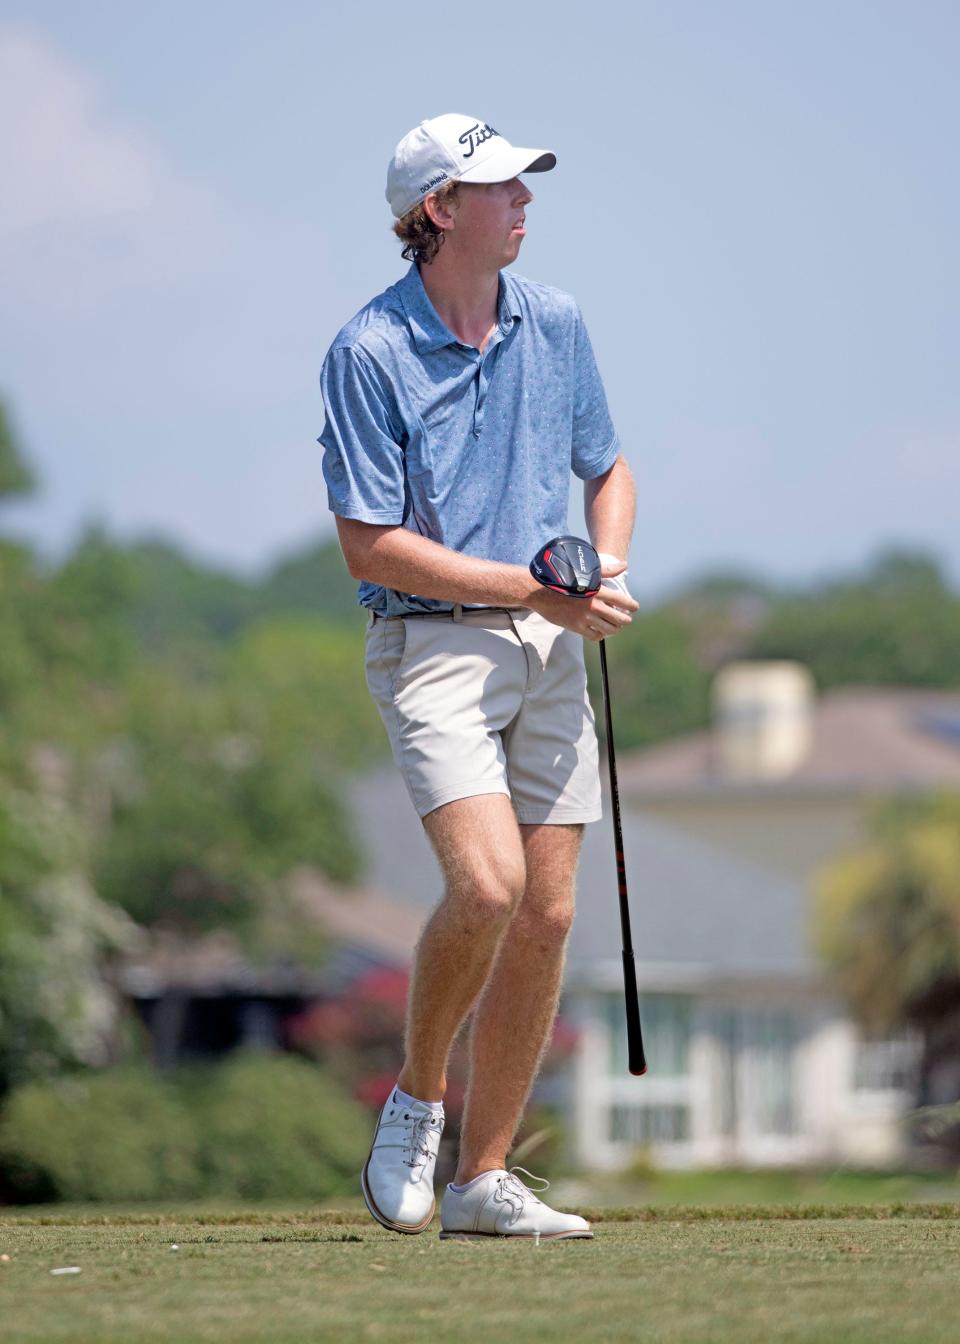 Mark Piver takes to the links to compete in the final round of the annual Divot Derby at Tiger Point Golf Course in Gulf Breeze on Wednesday, July 19, 2023.